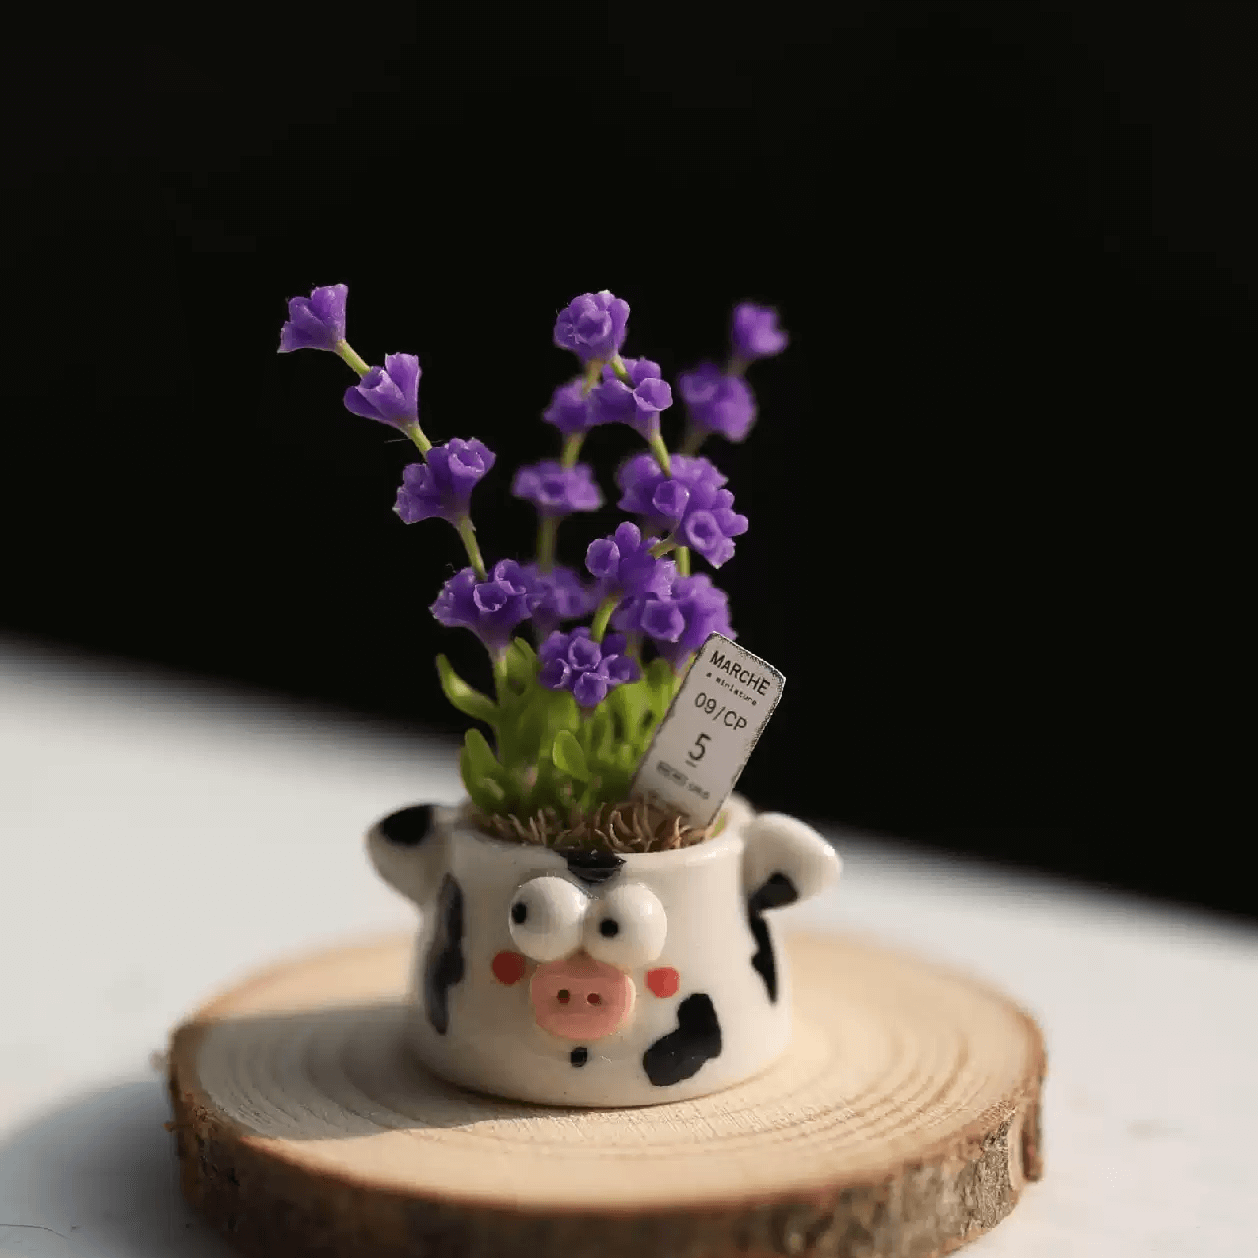 Lavender/Lavandula are popular, aromatic, drought-tolerant garden plants. They associate well with other shrubs, perennial plants and roses. Miniature for dolls, dollhouses, roomboxes. Suitable for Blythe, Barbie, Paola,and other dolls with a height of 25-40cm (10-15.8 inches).